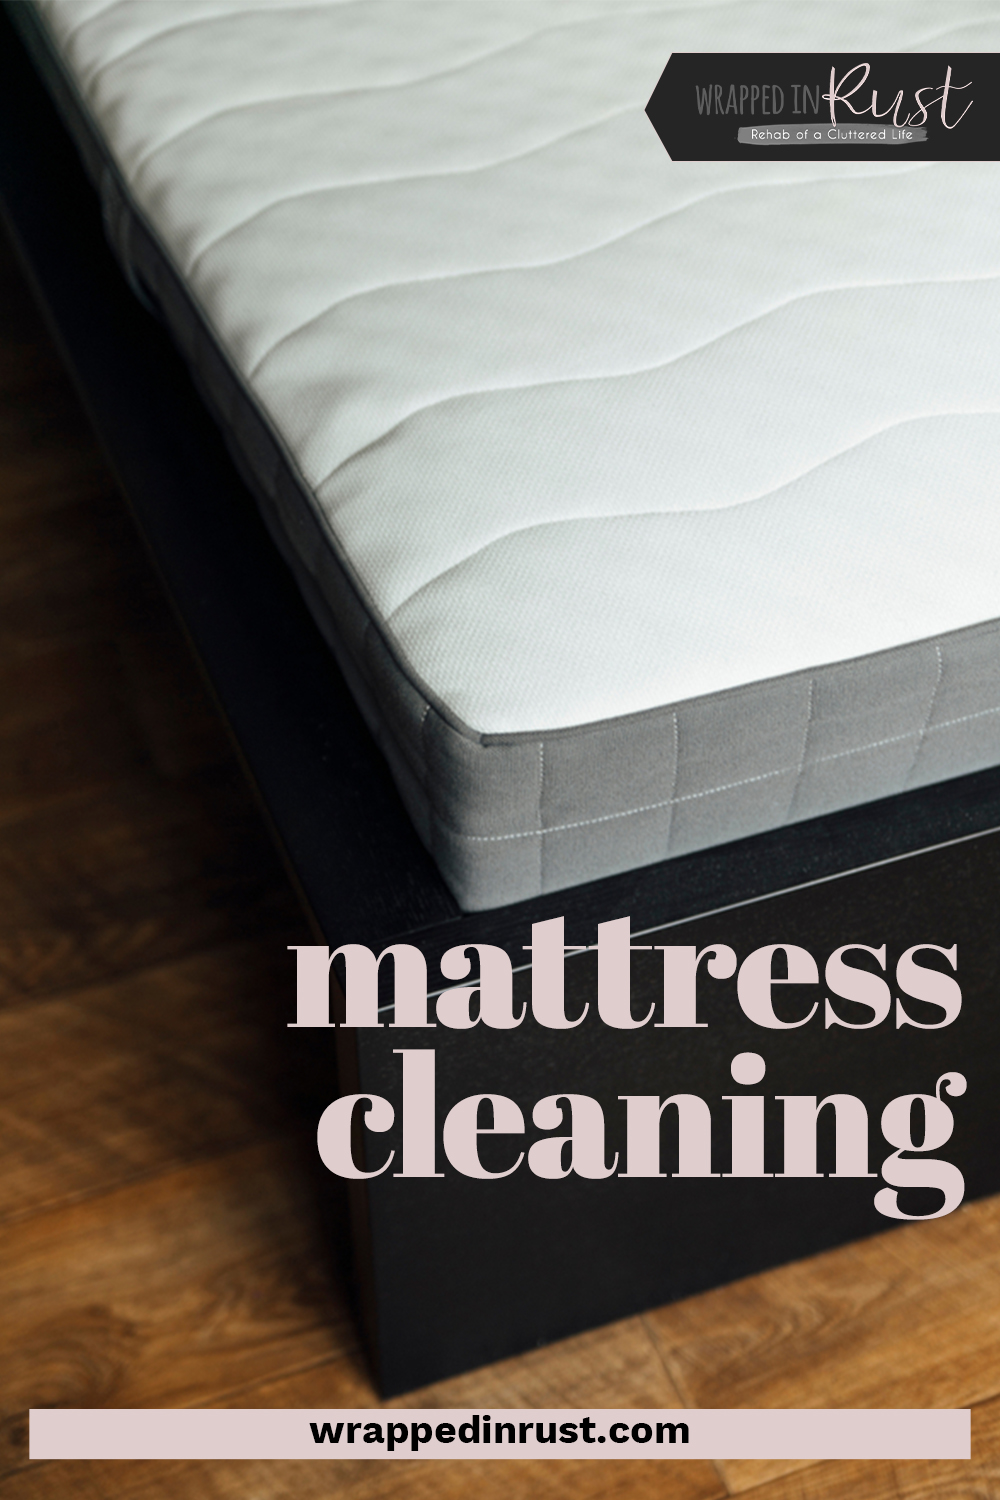 Mattress cleaning tips to help you clean and freshen your mattress in minutes. Don't let dust mites set up shop in your mattress--clean and freshen frequently to keep them at bay. #wrappedinrustblog #mattresscleaning #mattresscleaningwithbakingsoda